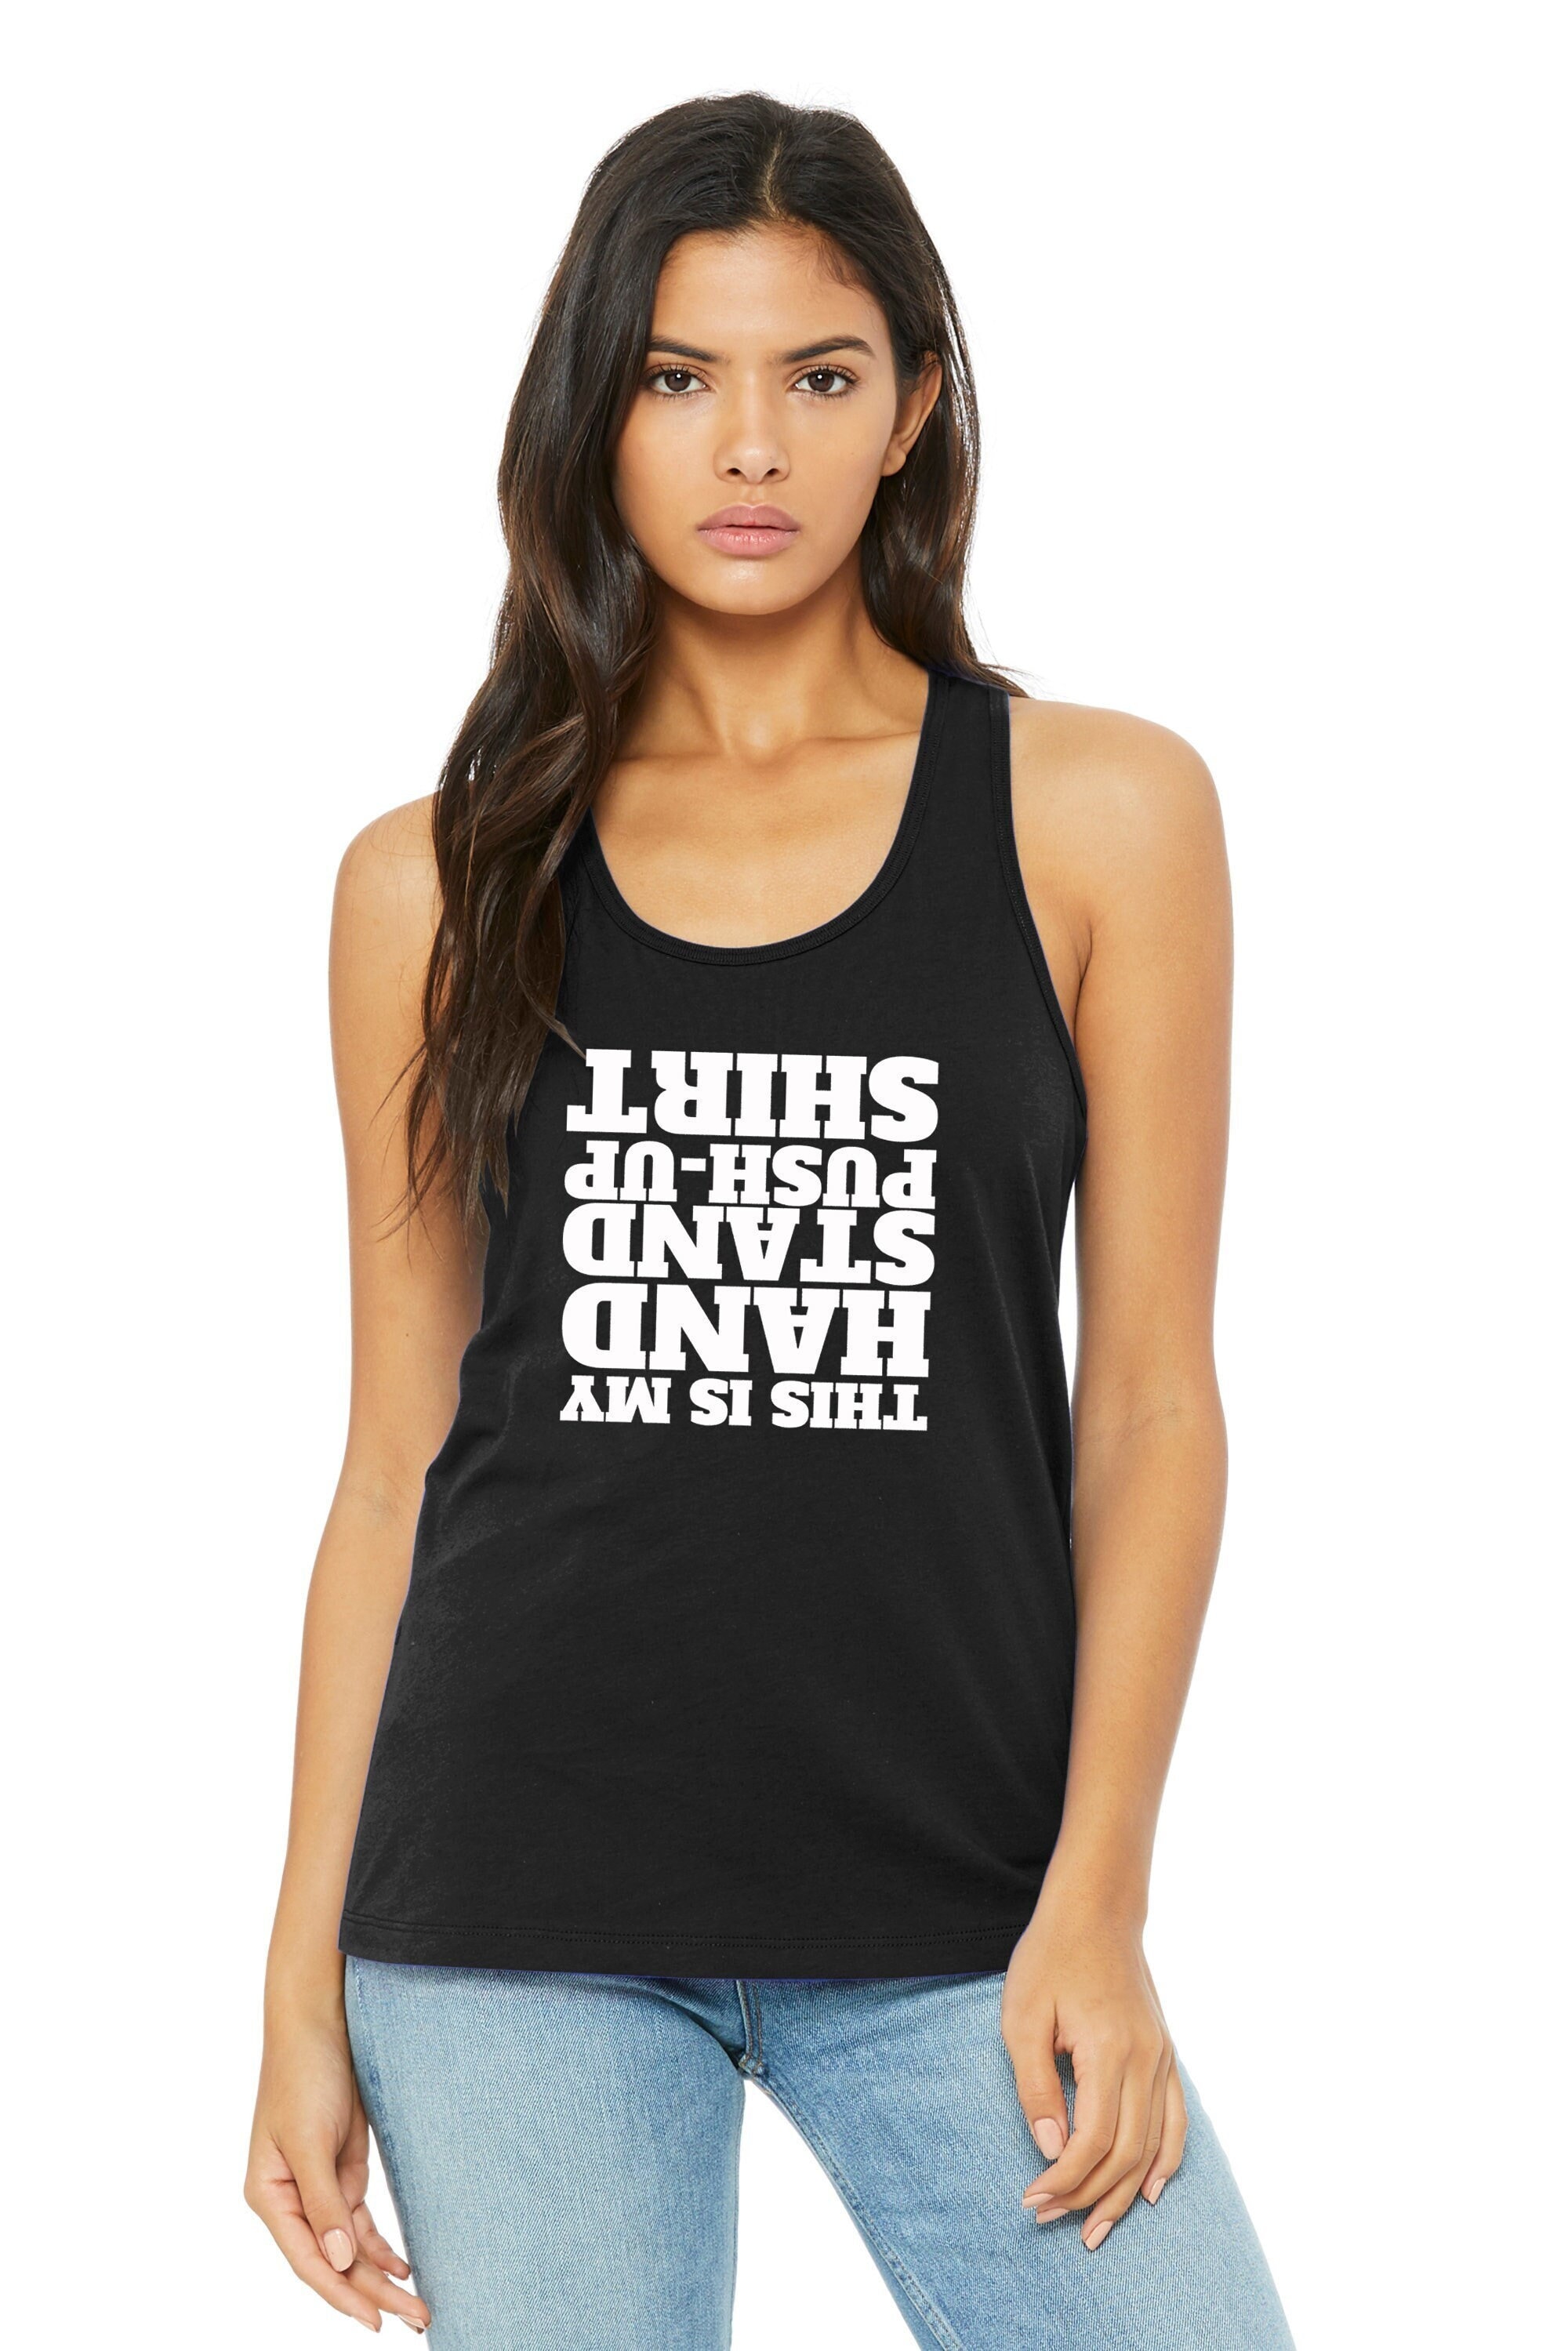 This is My Handstand PUSH-UP Shirt Ladies Racerback Tank Top -  Canada